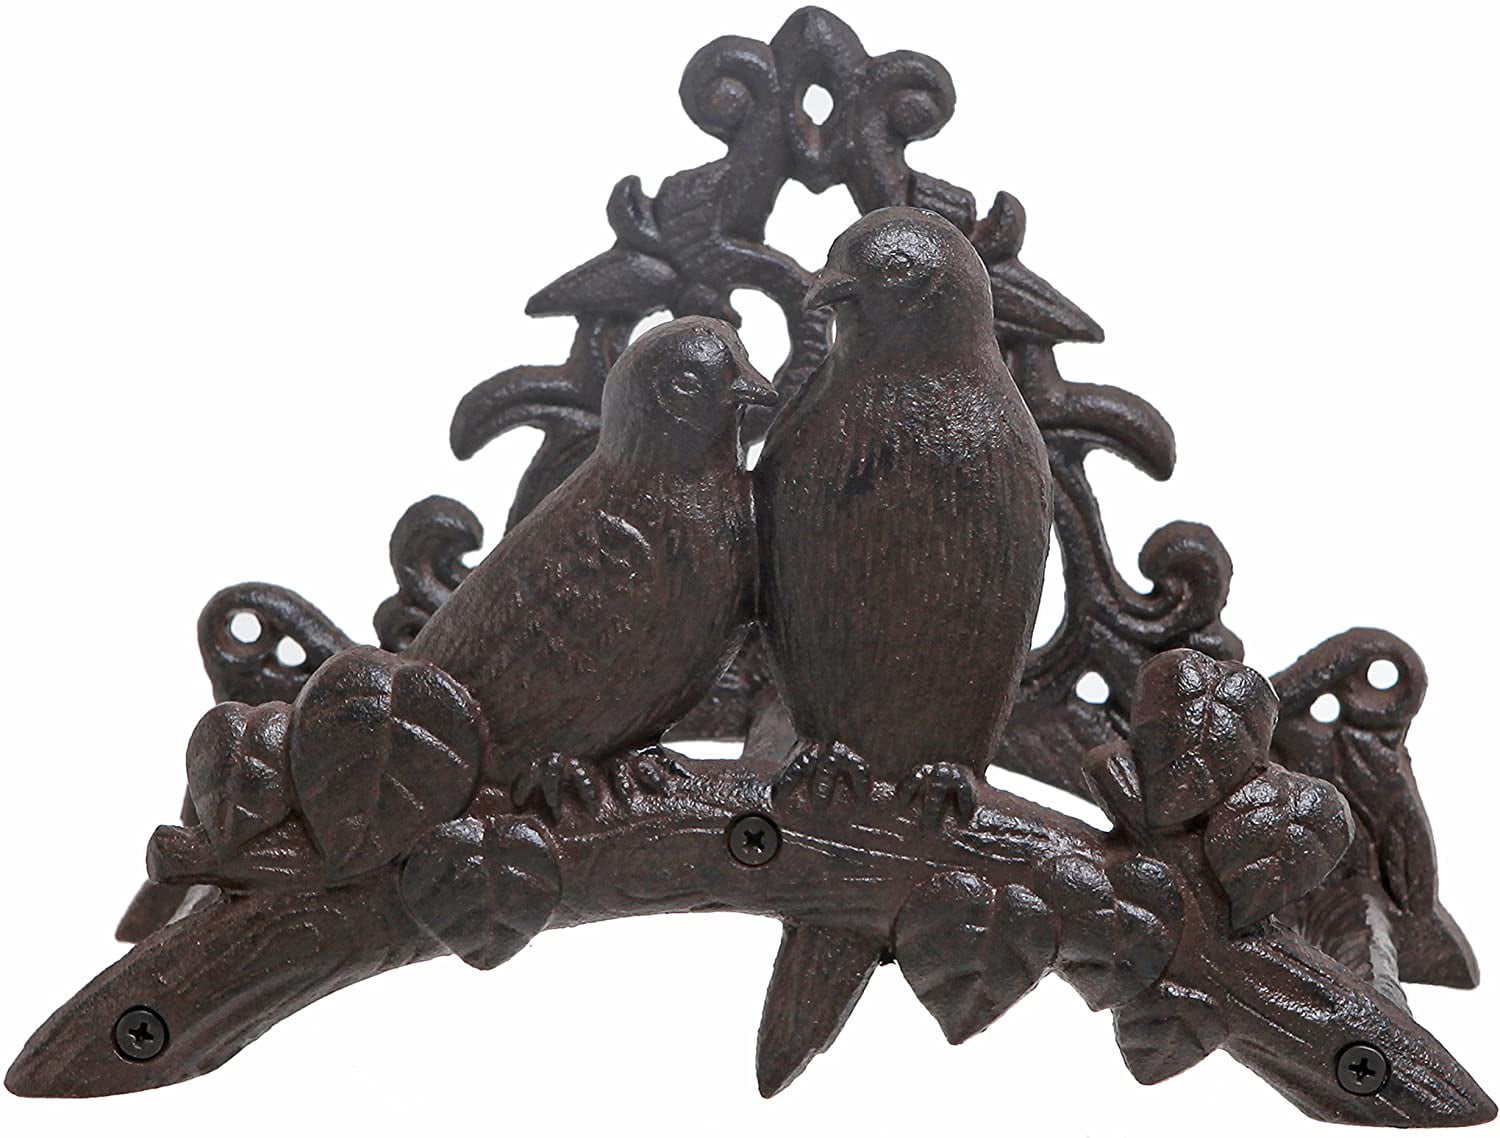 Brown MyGift Wall Mounted Cast Iron Garden Hose Hanger Rack with Bird Ornament and Tree Branch Design